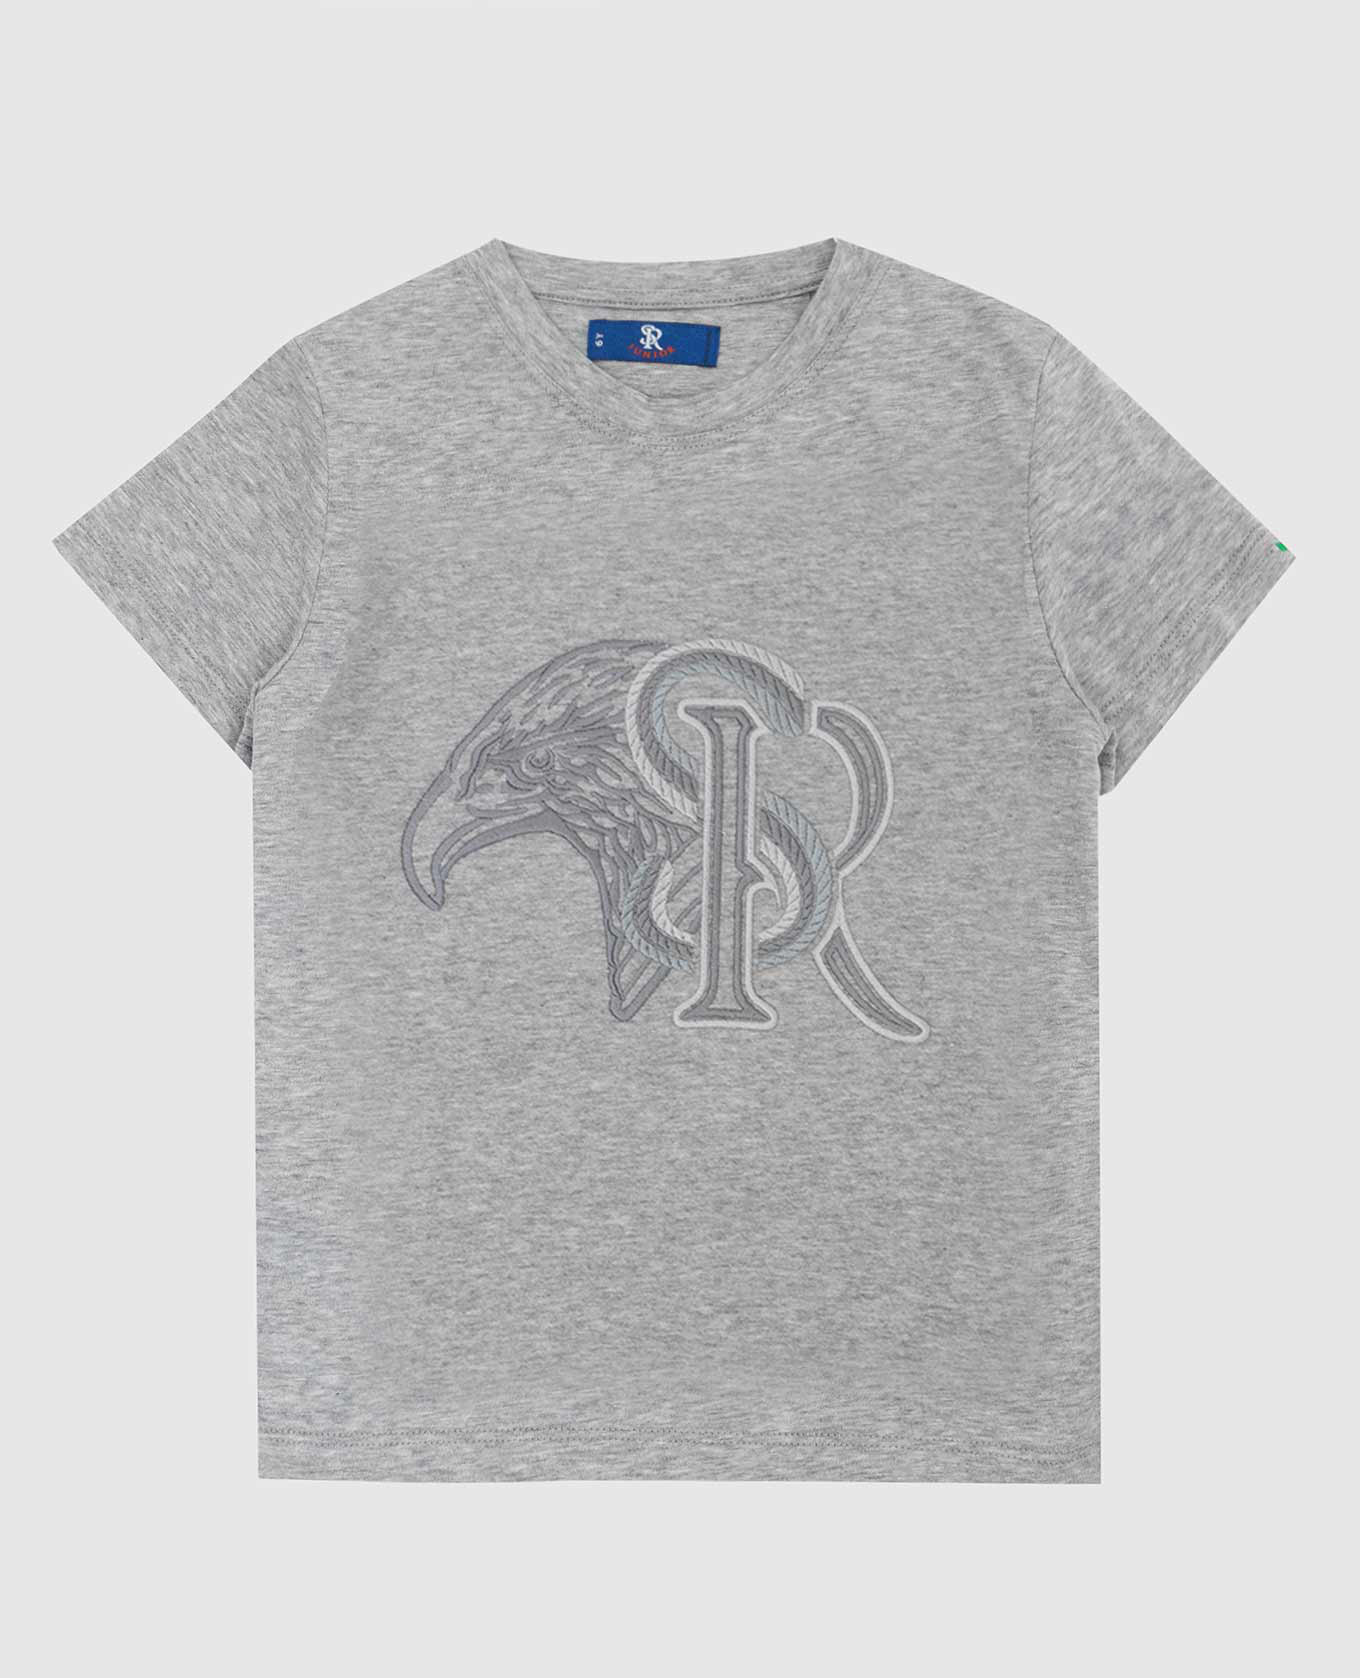 Children's light gray t-shirt with logo embroidery